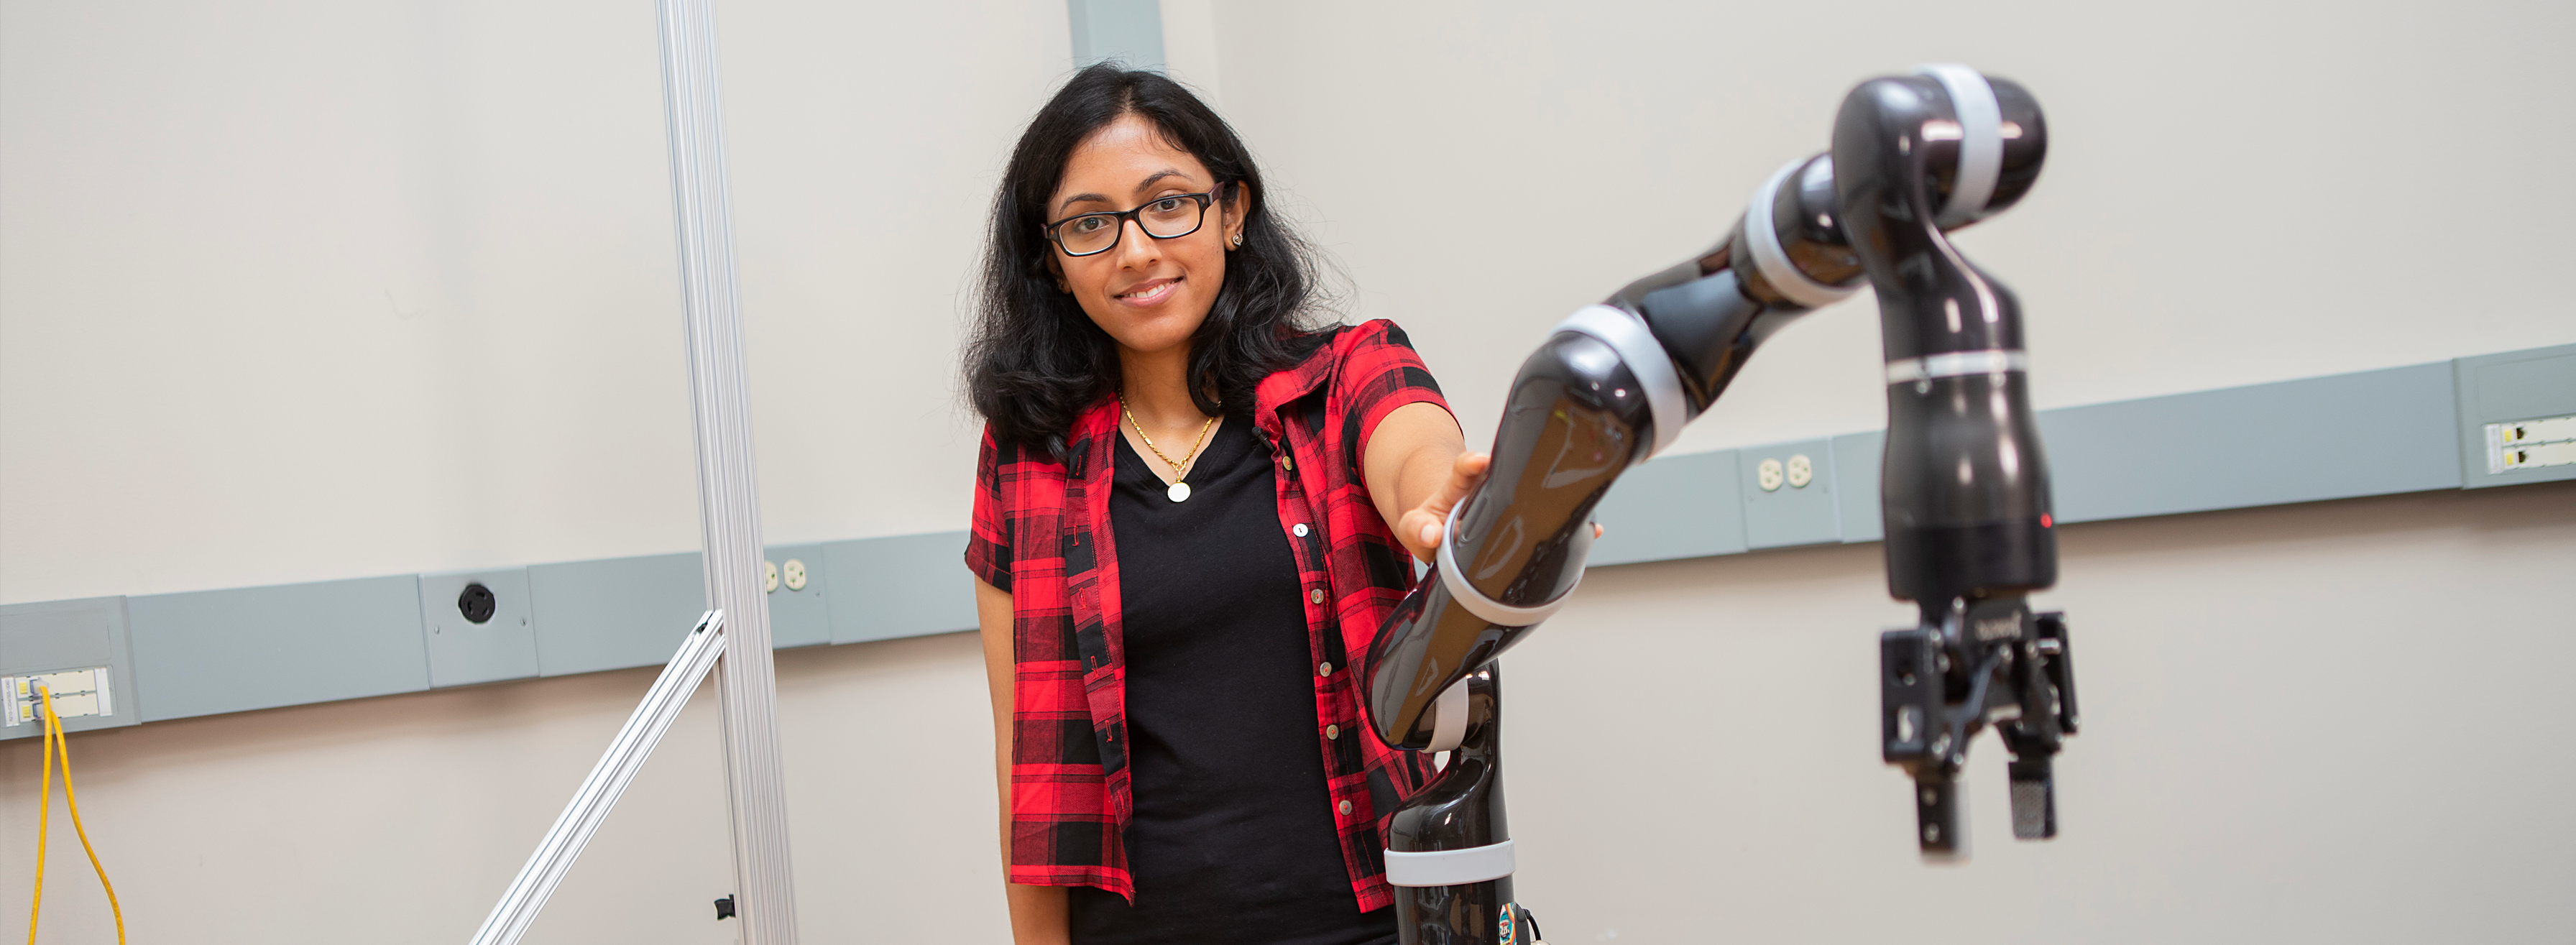 Georgia Tech Research Student with Robot Arm